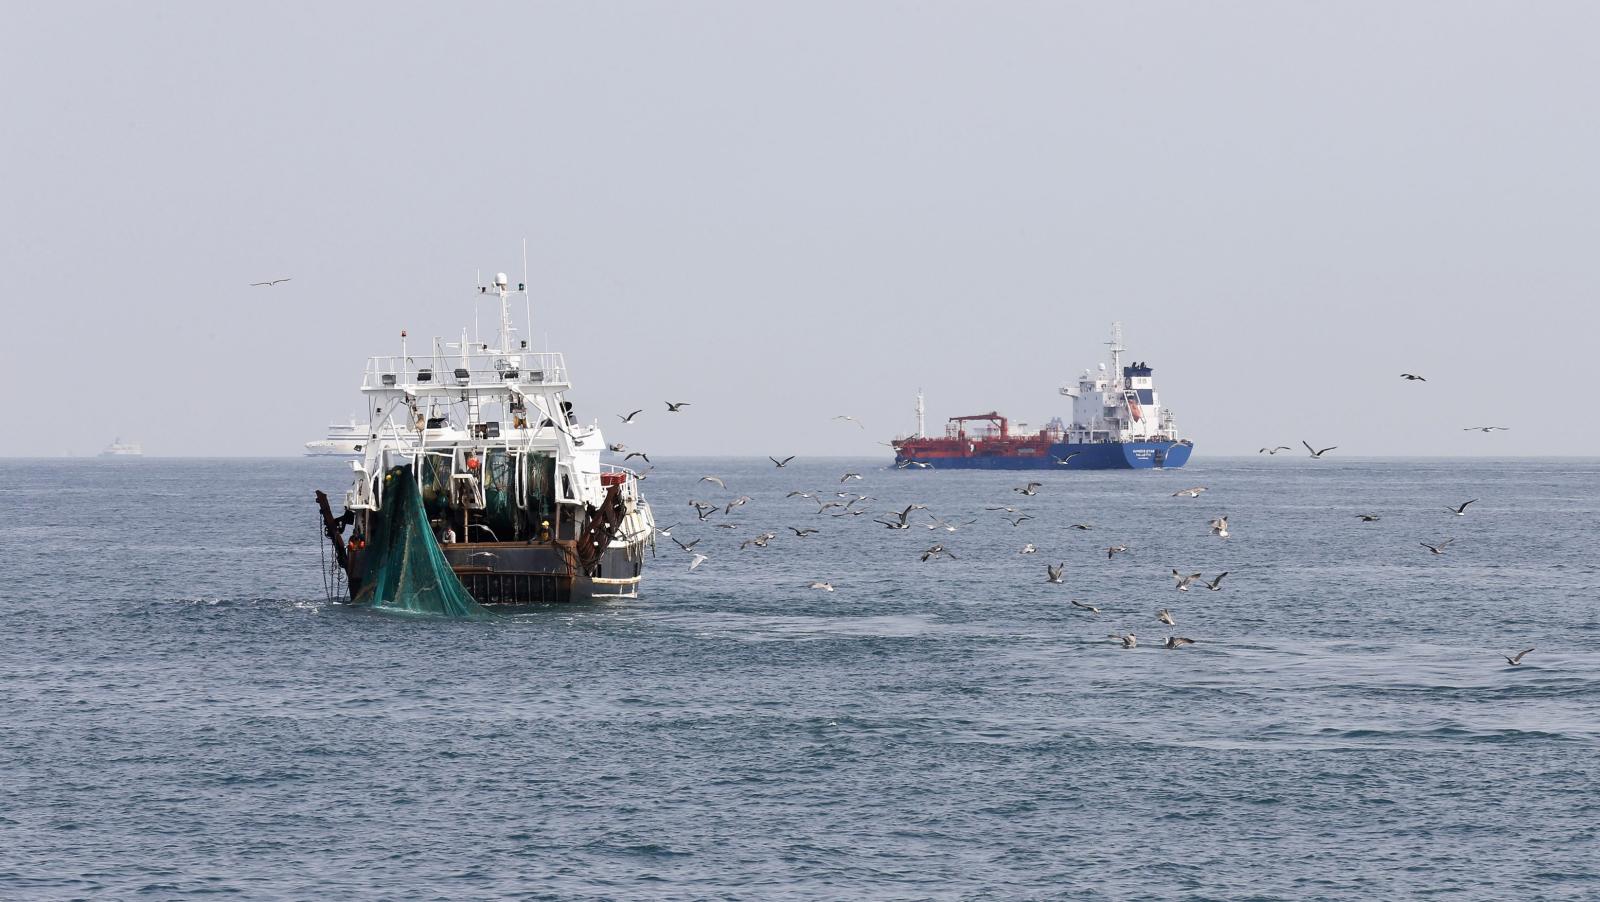 EU Nations Authorized Their Vessels to Unlawfully Fish in African Waters